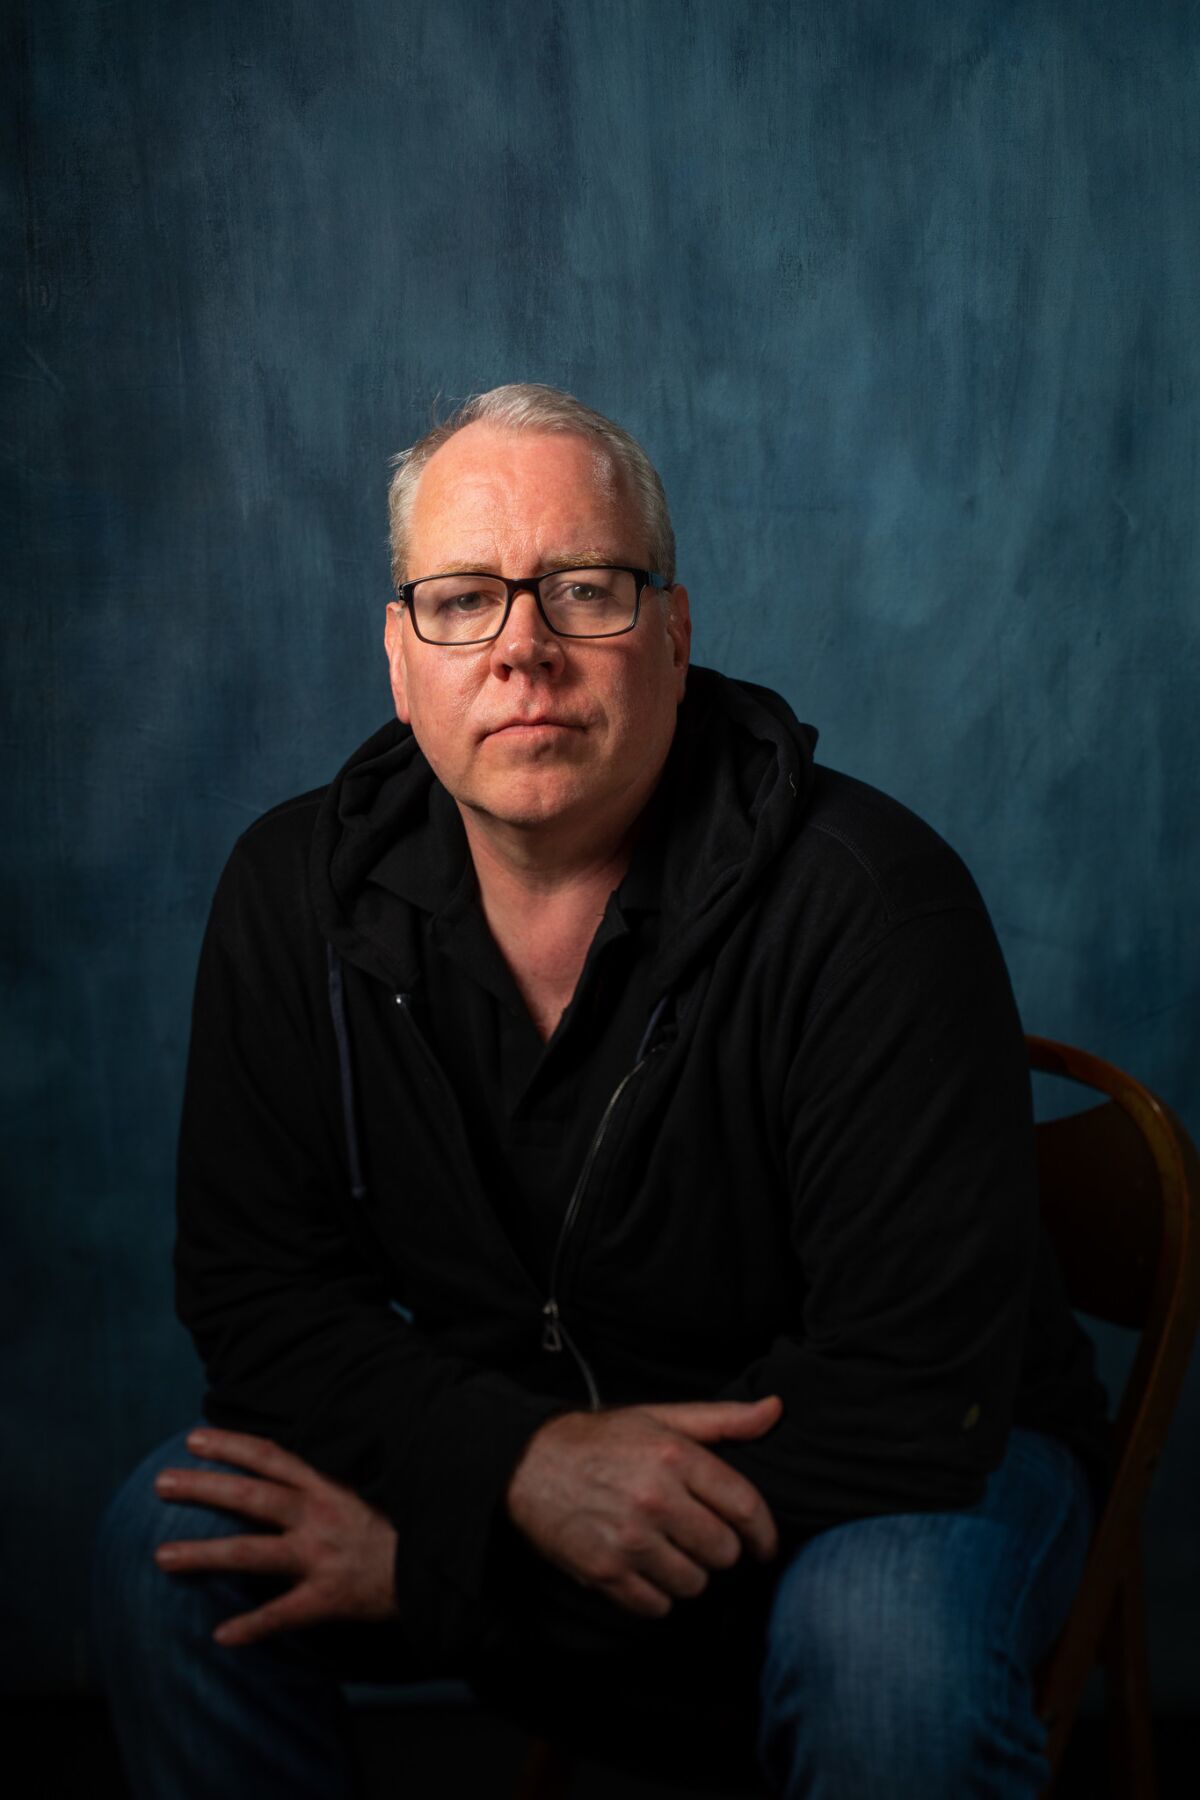 Author Bret Easton Ellis is photographed in the L.A. Times Festival of Books photo studio at USC.